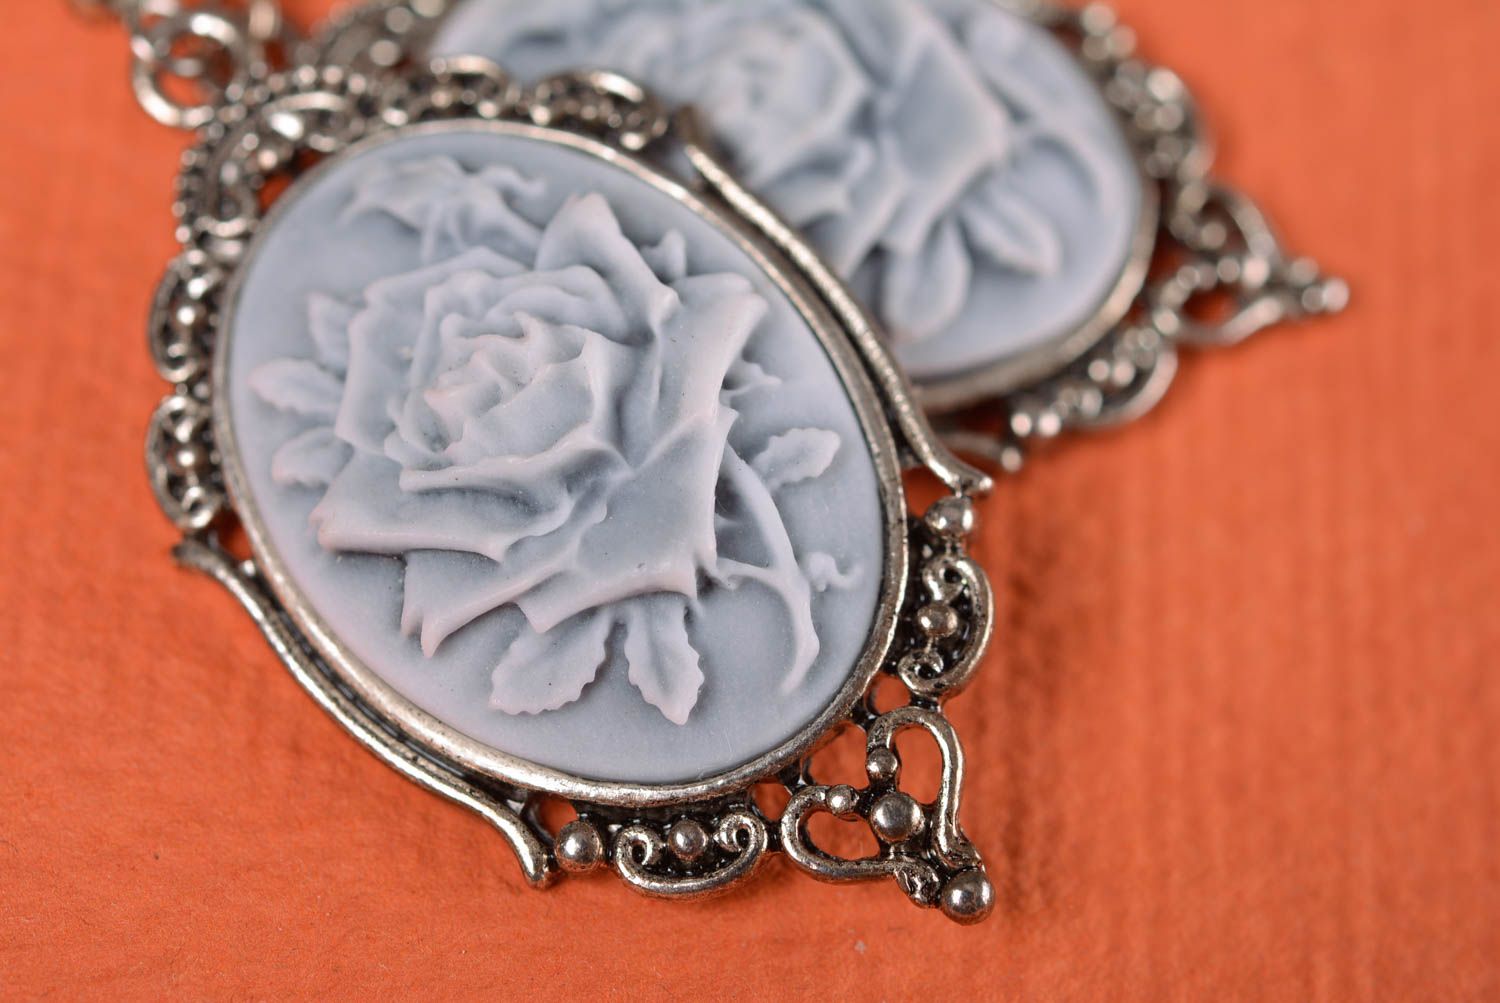 Handmade stylish earrings with cameos charms made of polymer clay and metal  photo 3